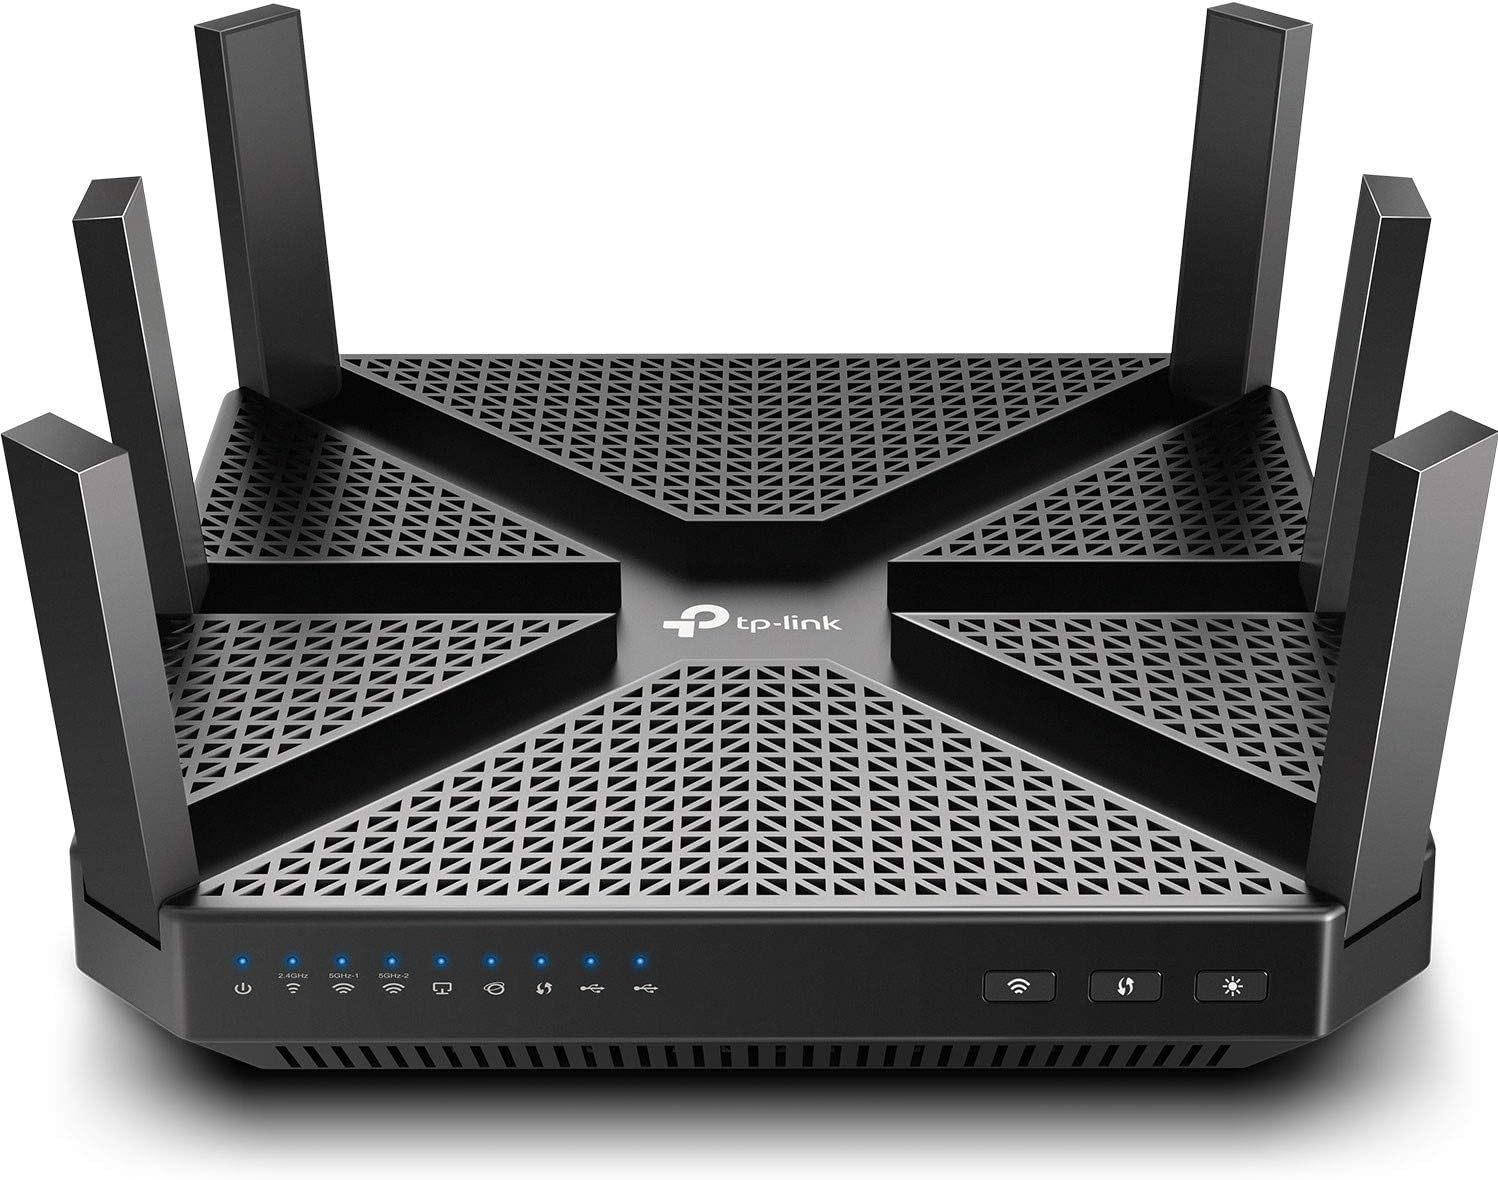 Tp-Link Ac4000 Smart Wifi Router - Tri Band Router, Mu-Mimo, Vpn Server,, Black. - $111.93